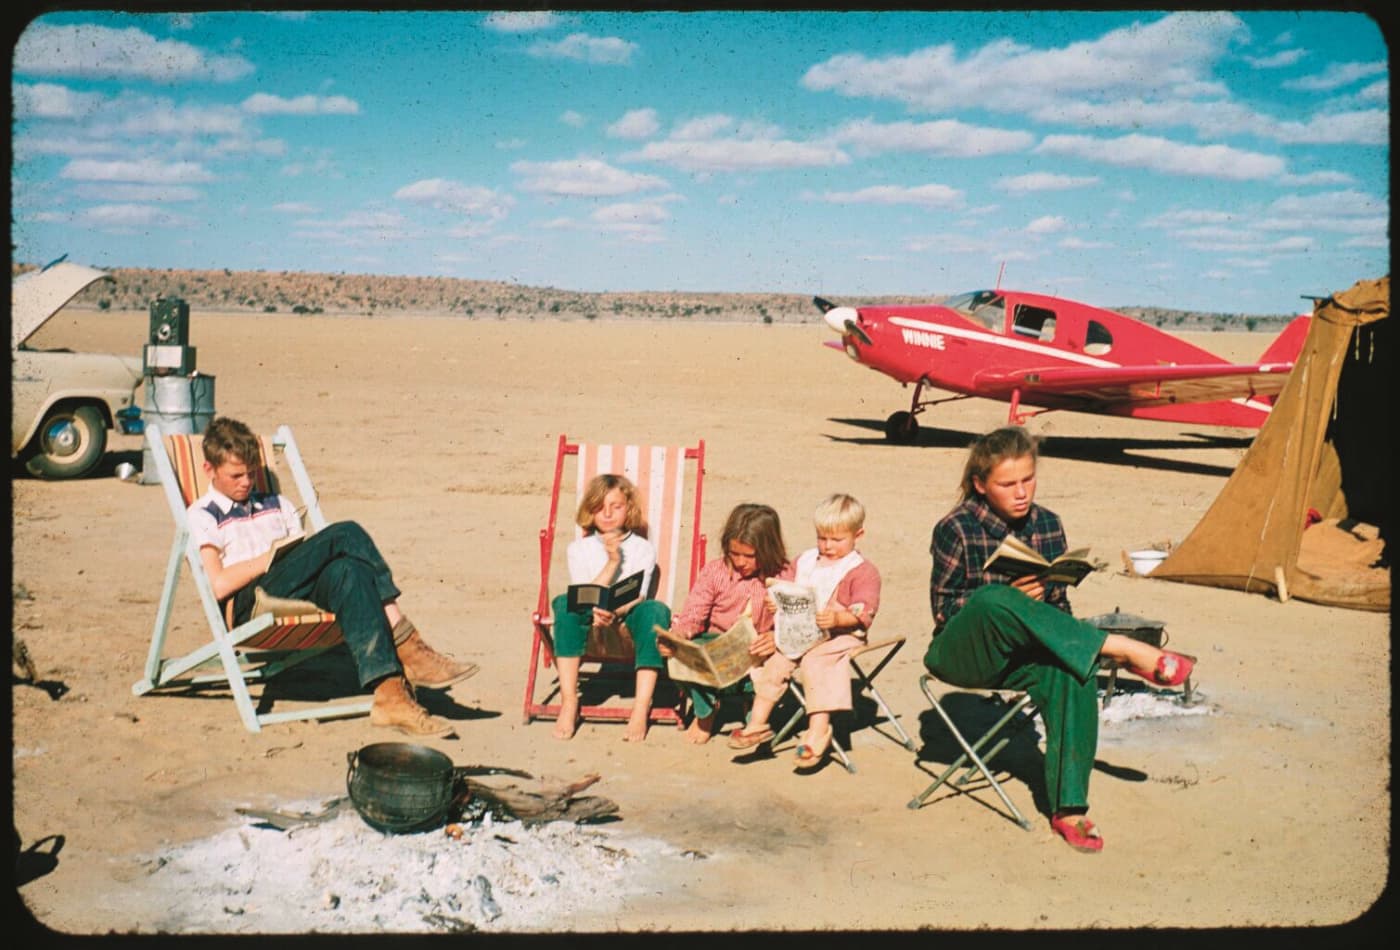 Maye Musk, in the pink shirt, sitting in the Kalahari Desert with her four other siblings.